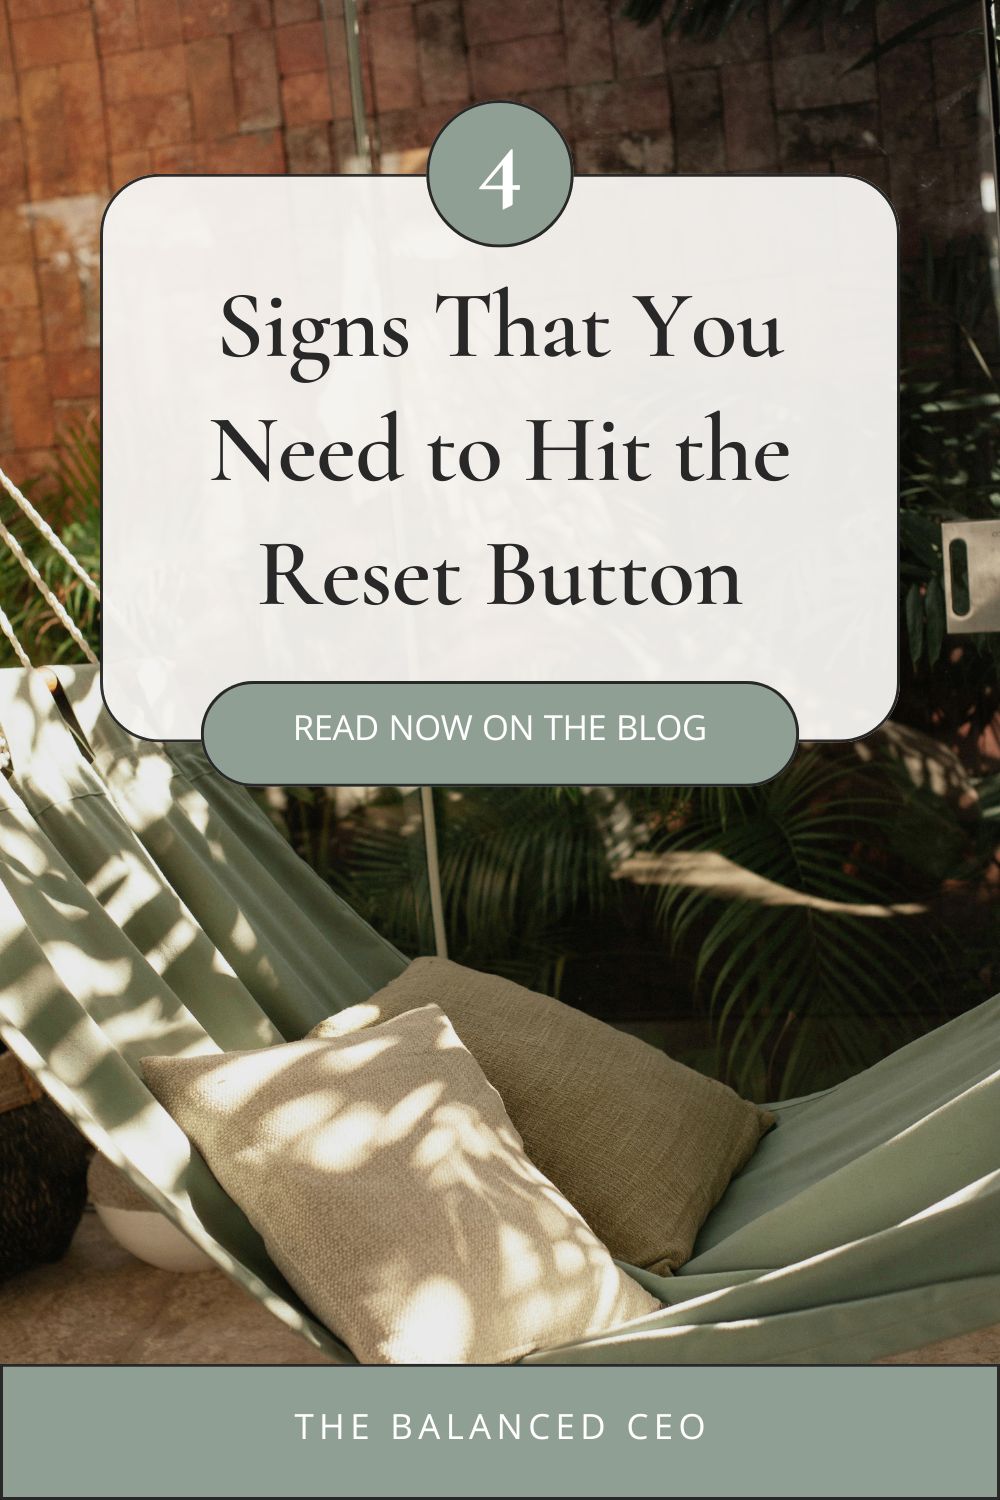 4 Simple Signs That You Need to Hit the Reset Button